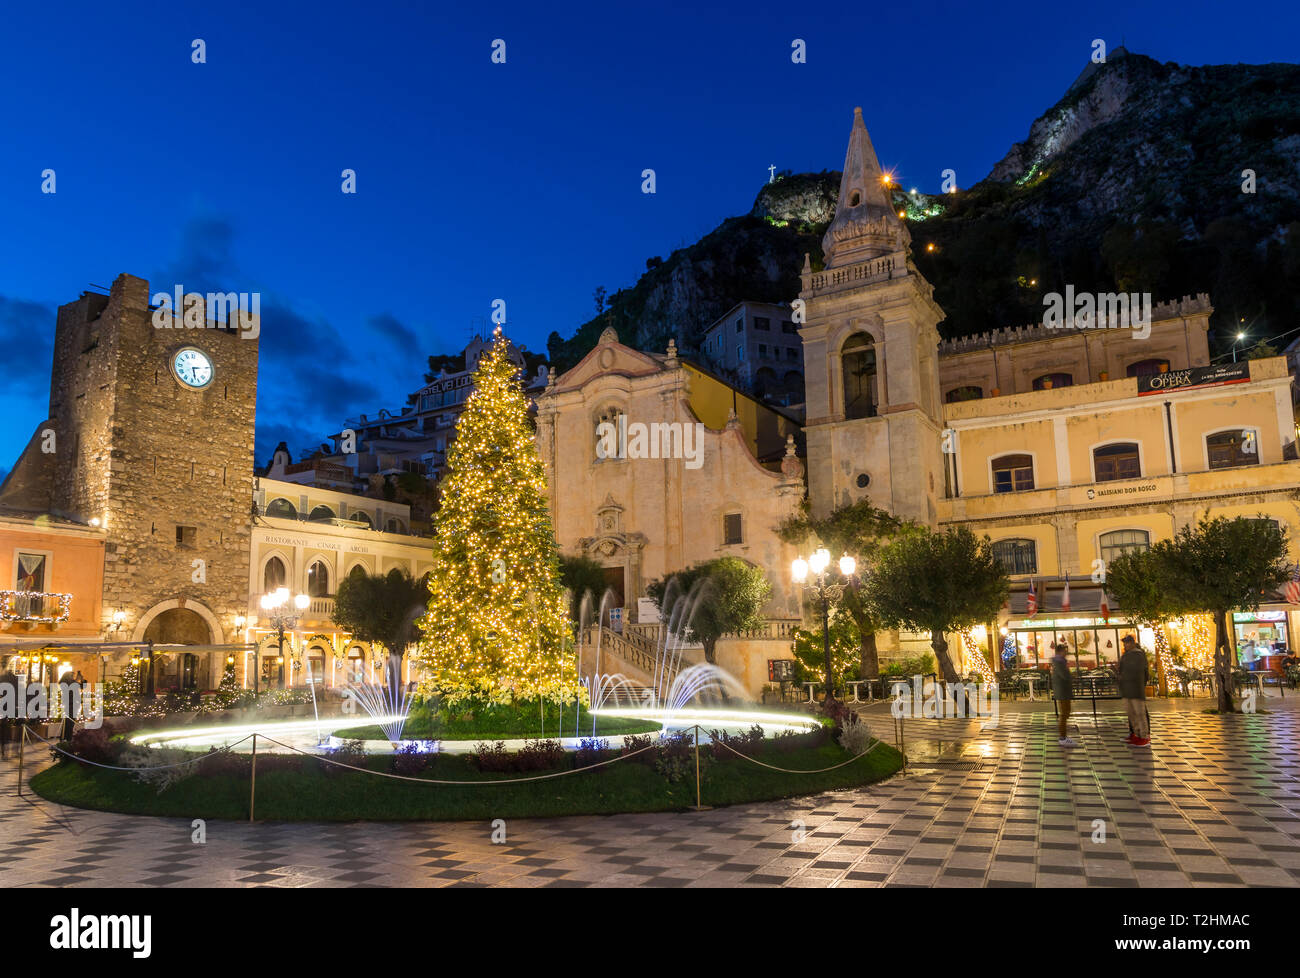 San Guiseppe church and the clock tower gate at Piazza IX Aprile during blue hour, Taormina, Sicily, Italy, Europe Stock Photo